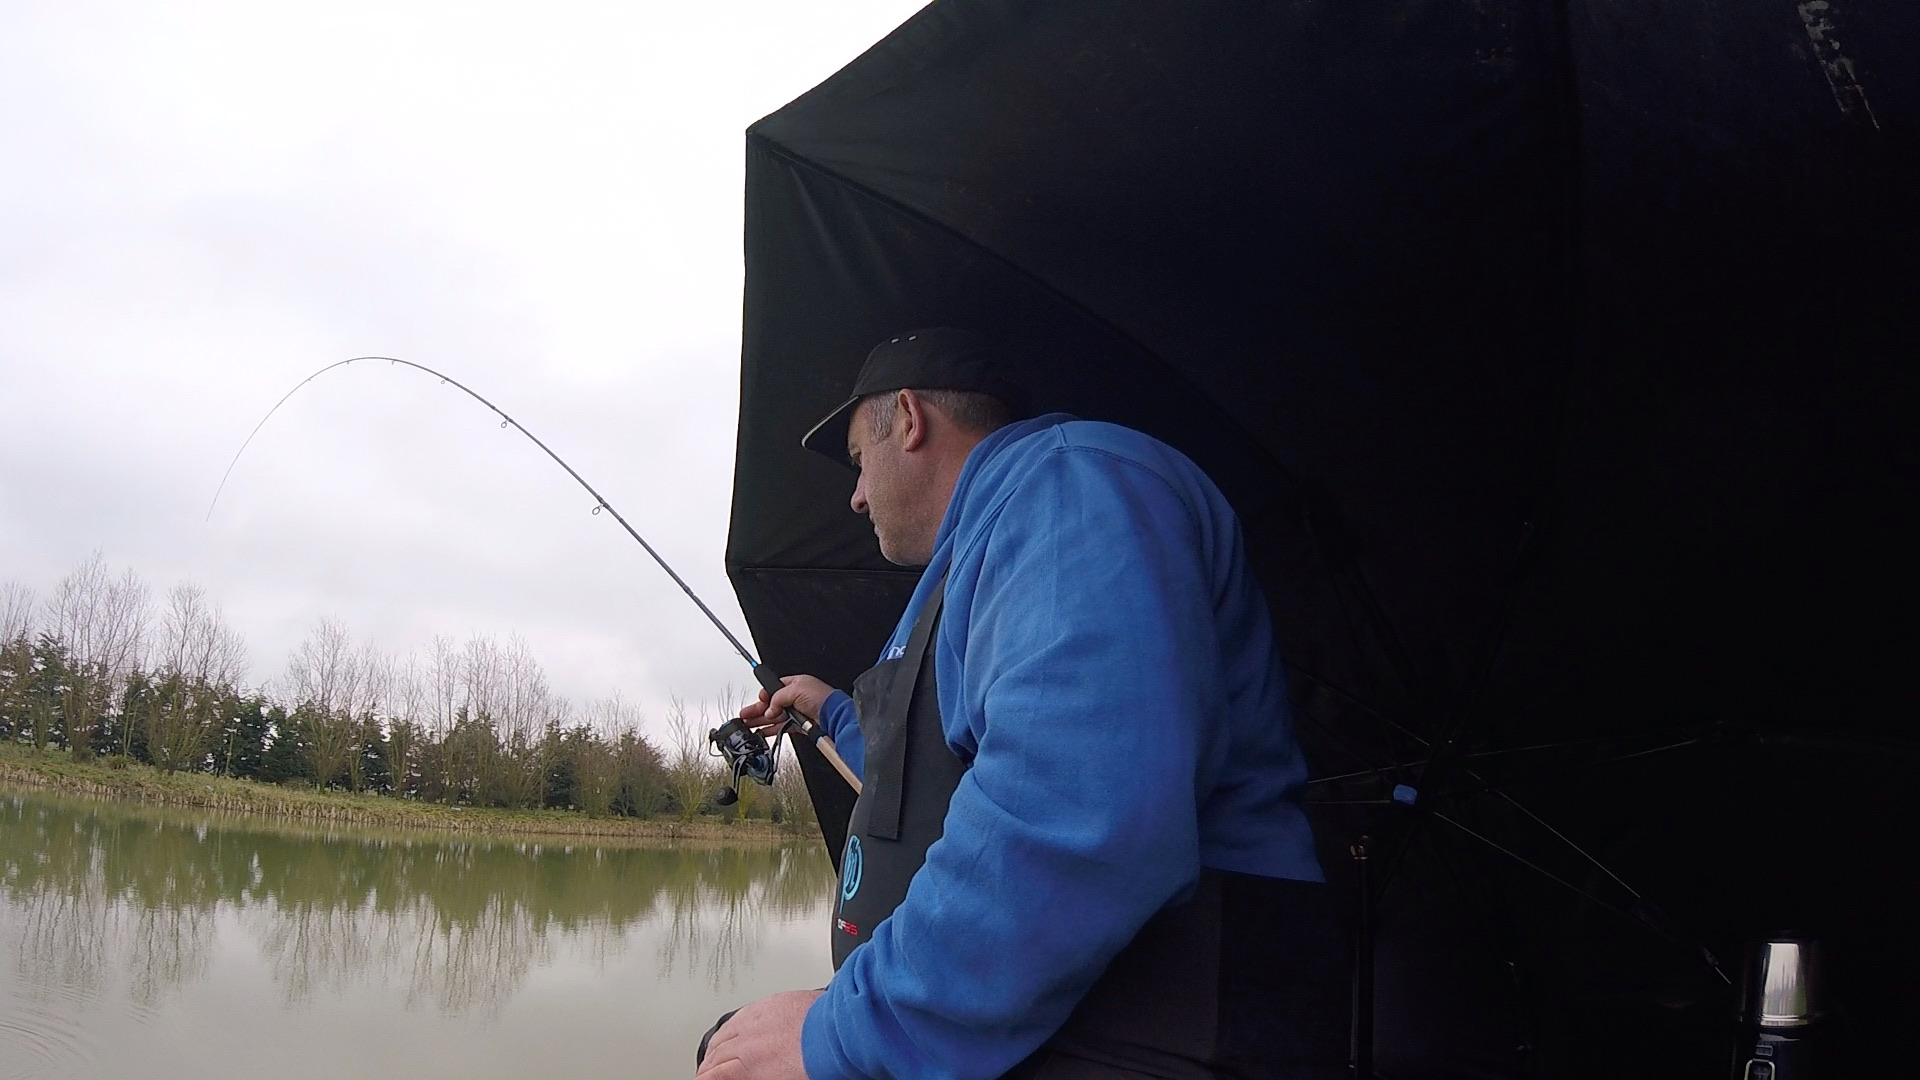 Steven Cowley on the Cadence CR10 10ft and 11ft Feeder Rods